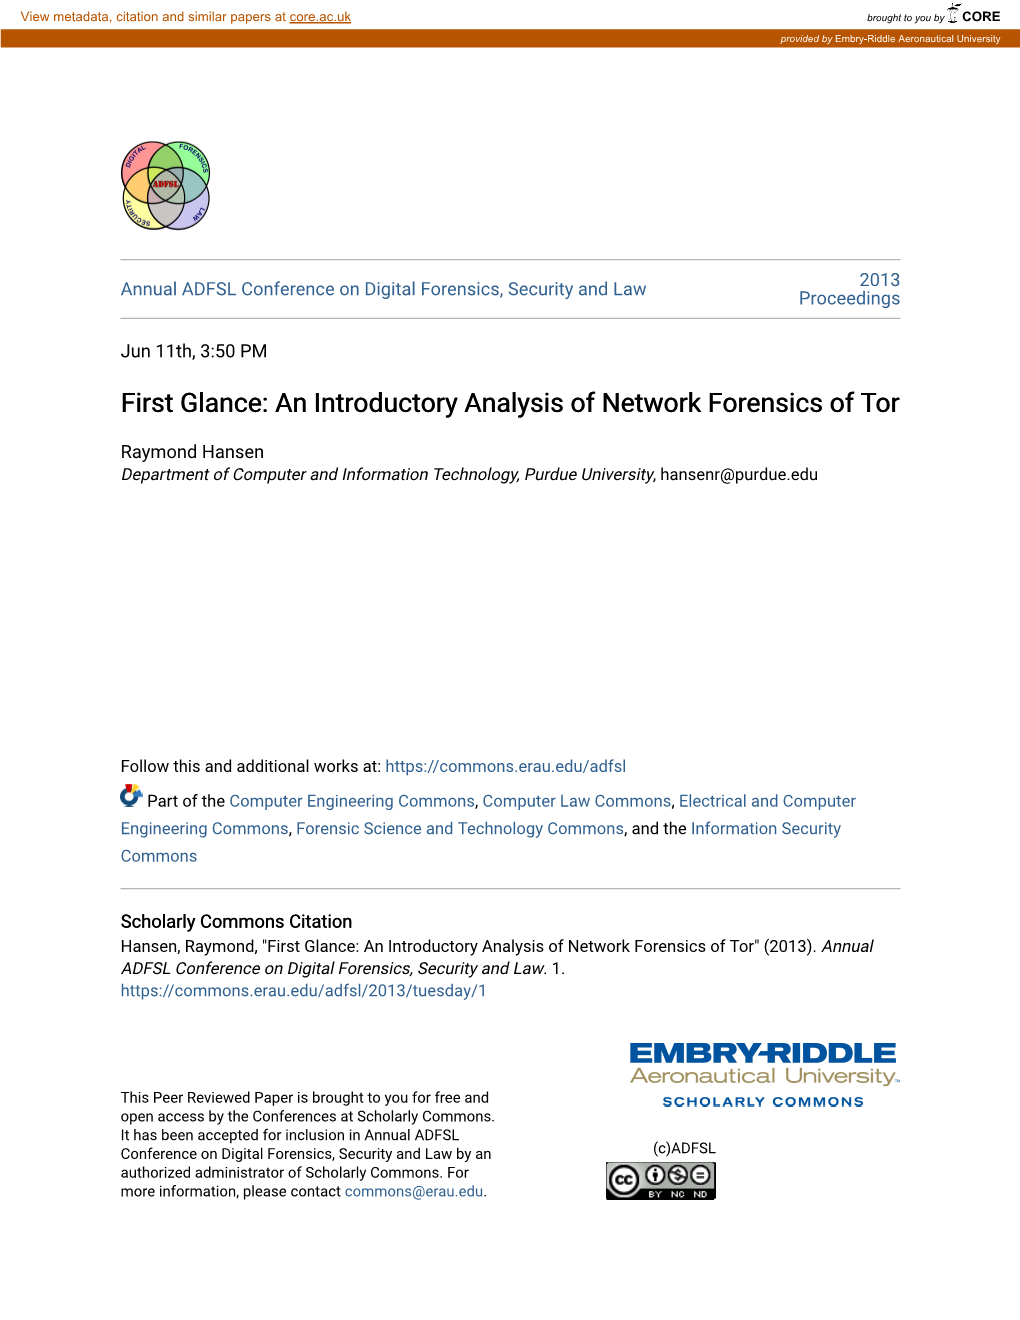 First Glance: an Introductory Analysis of Network Forensics of Tor